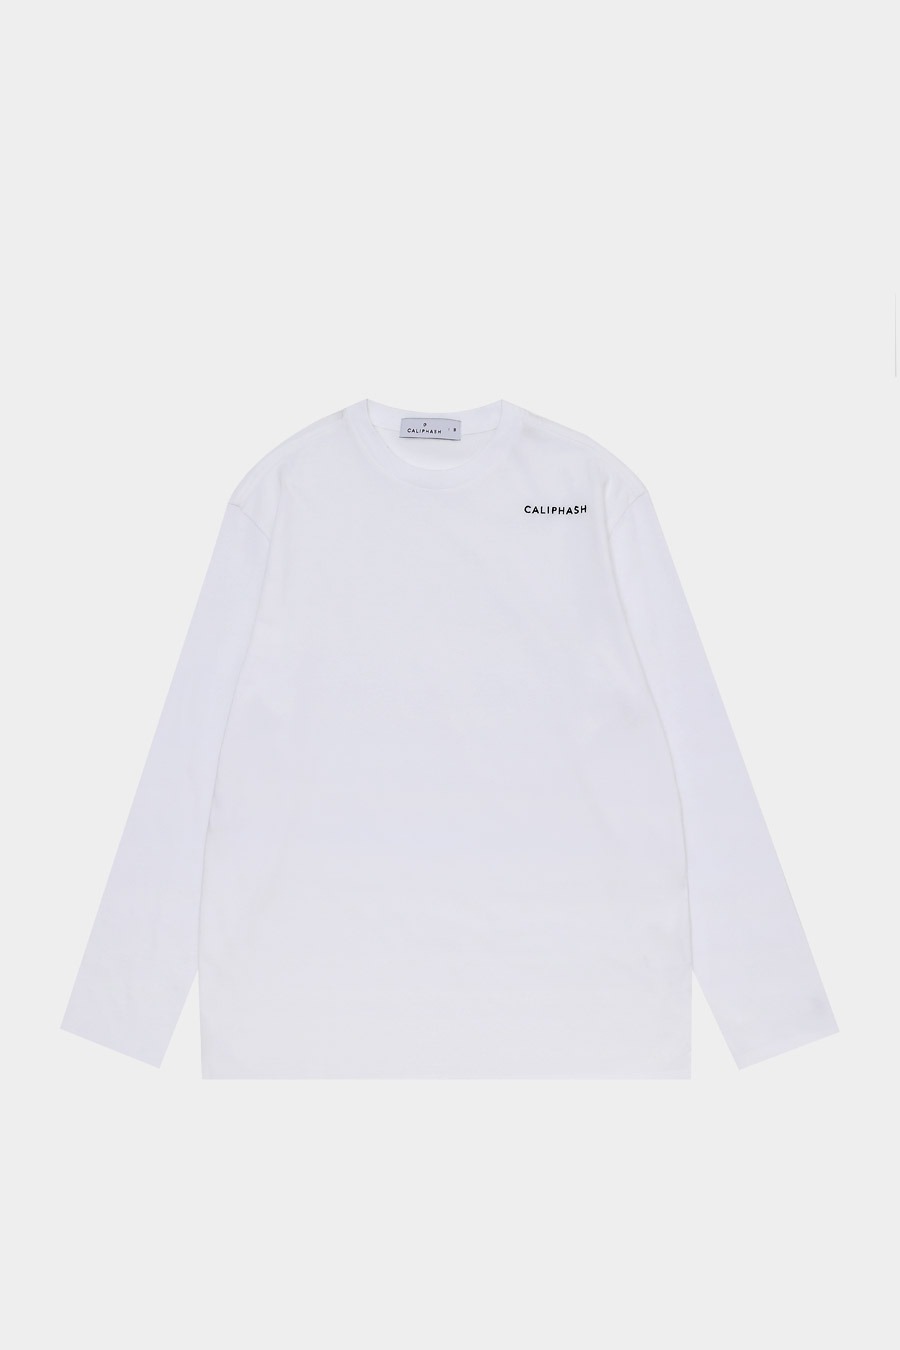 Signature Long Sleeved Tee WHITE (CP1SMTS309WH)